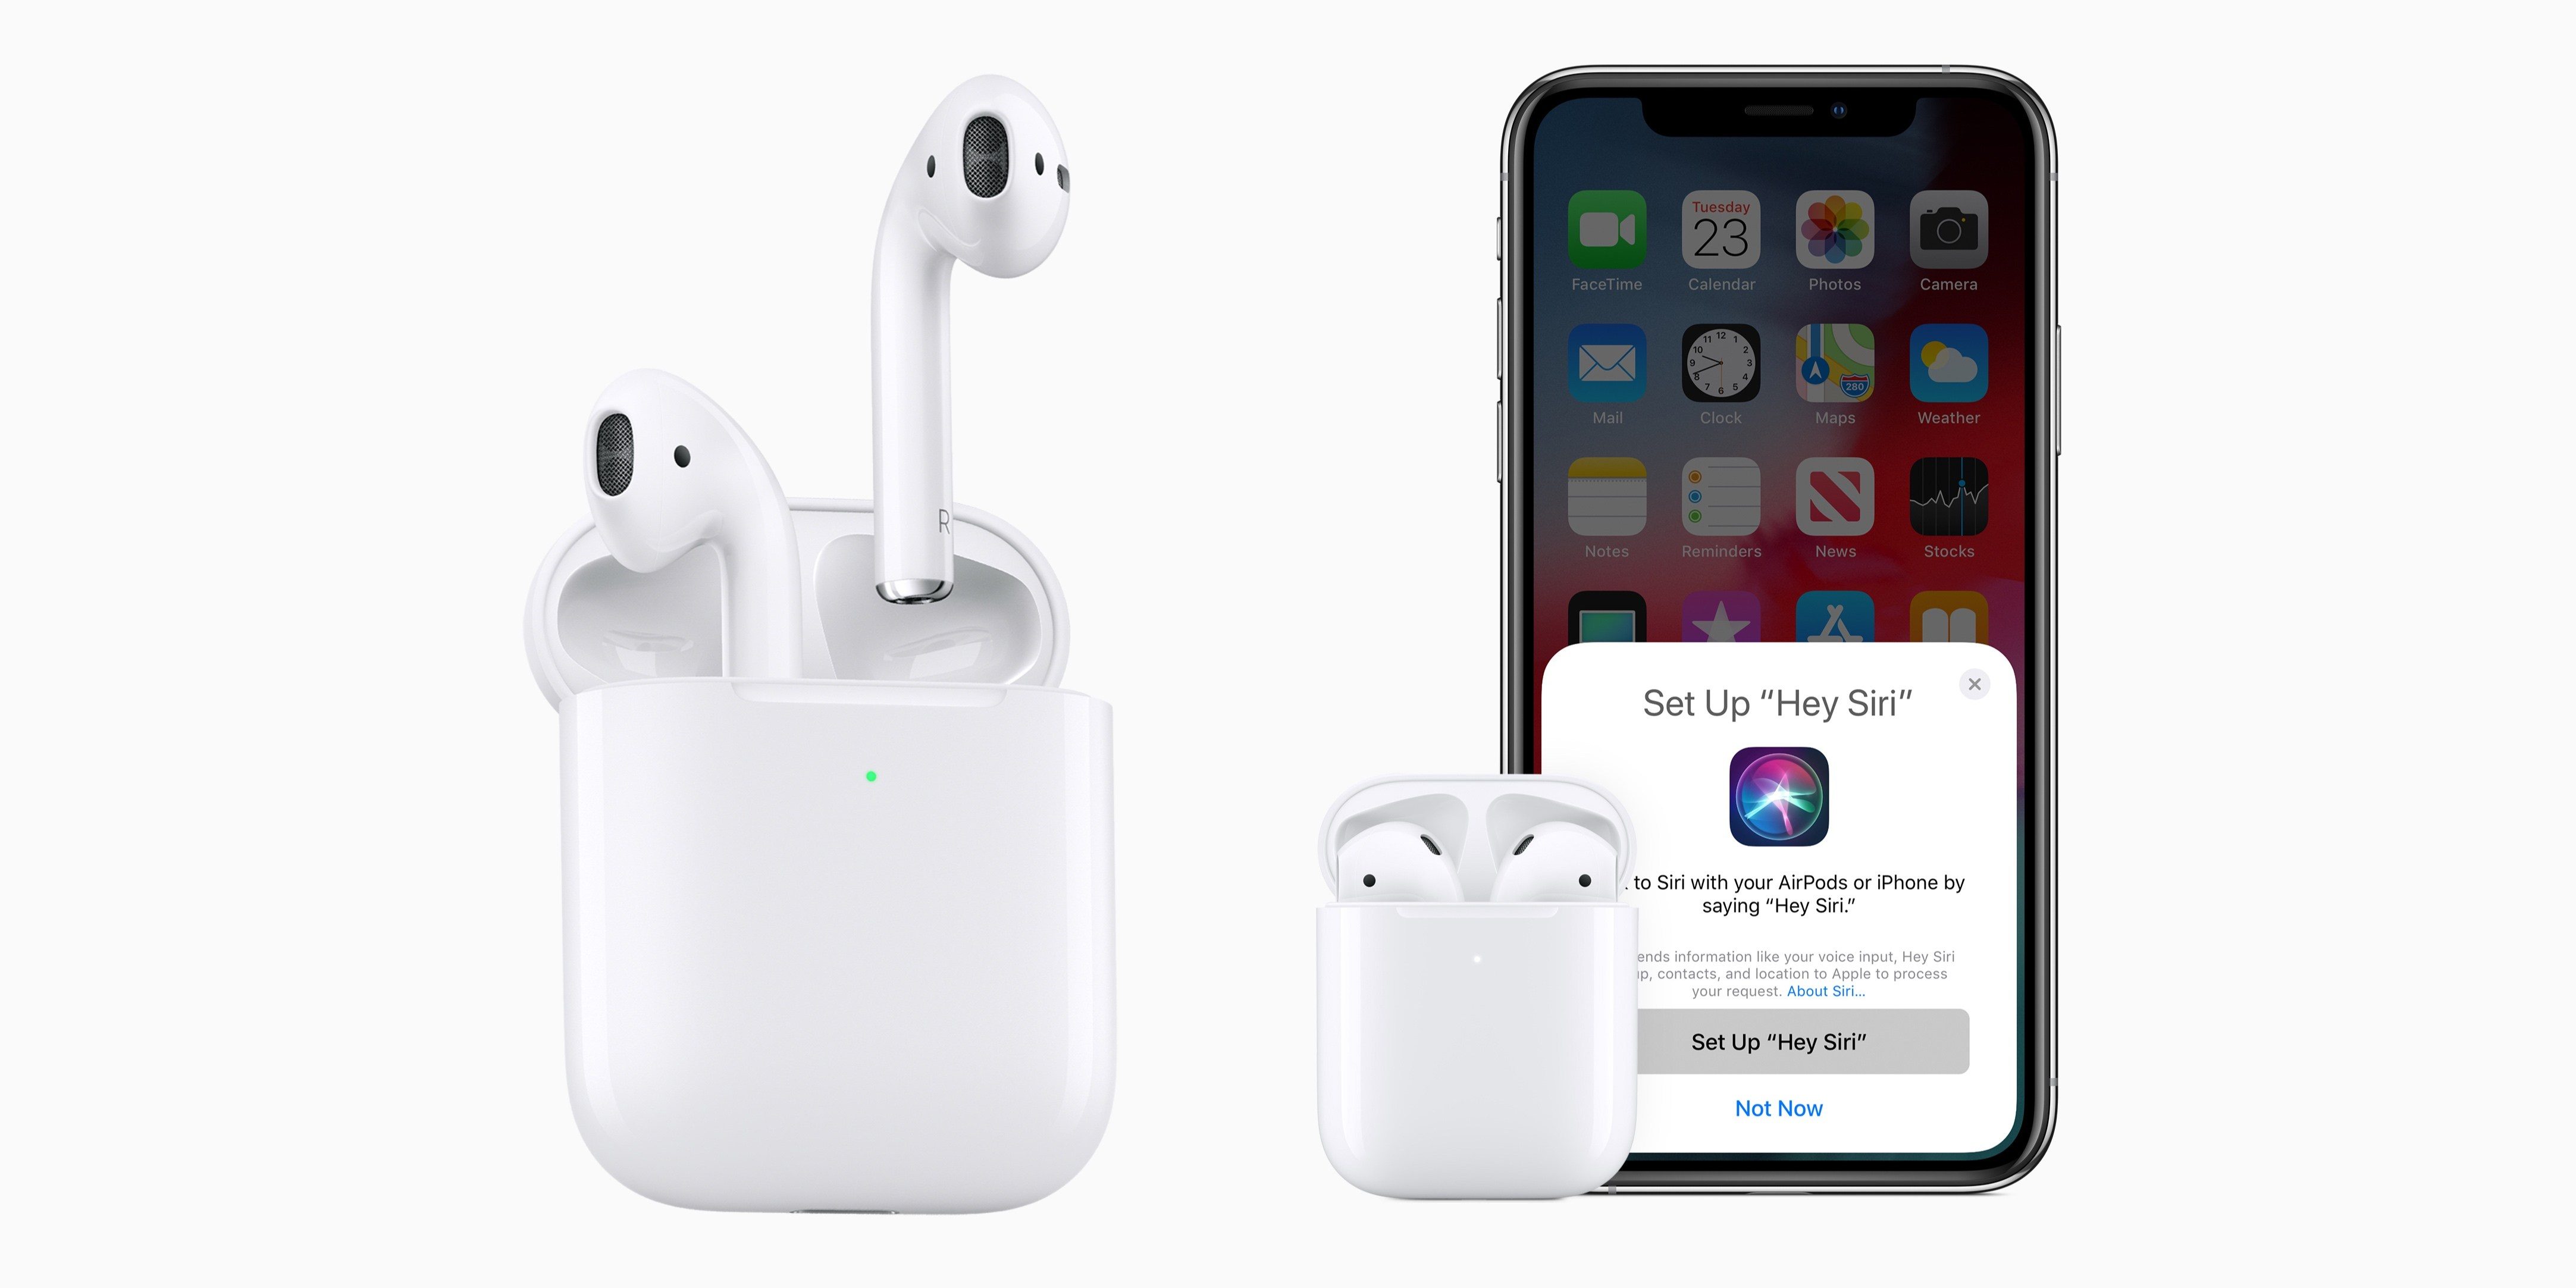 apple officially reveals second gen airpods h1 chip wireless charge case hands free hey siri